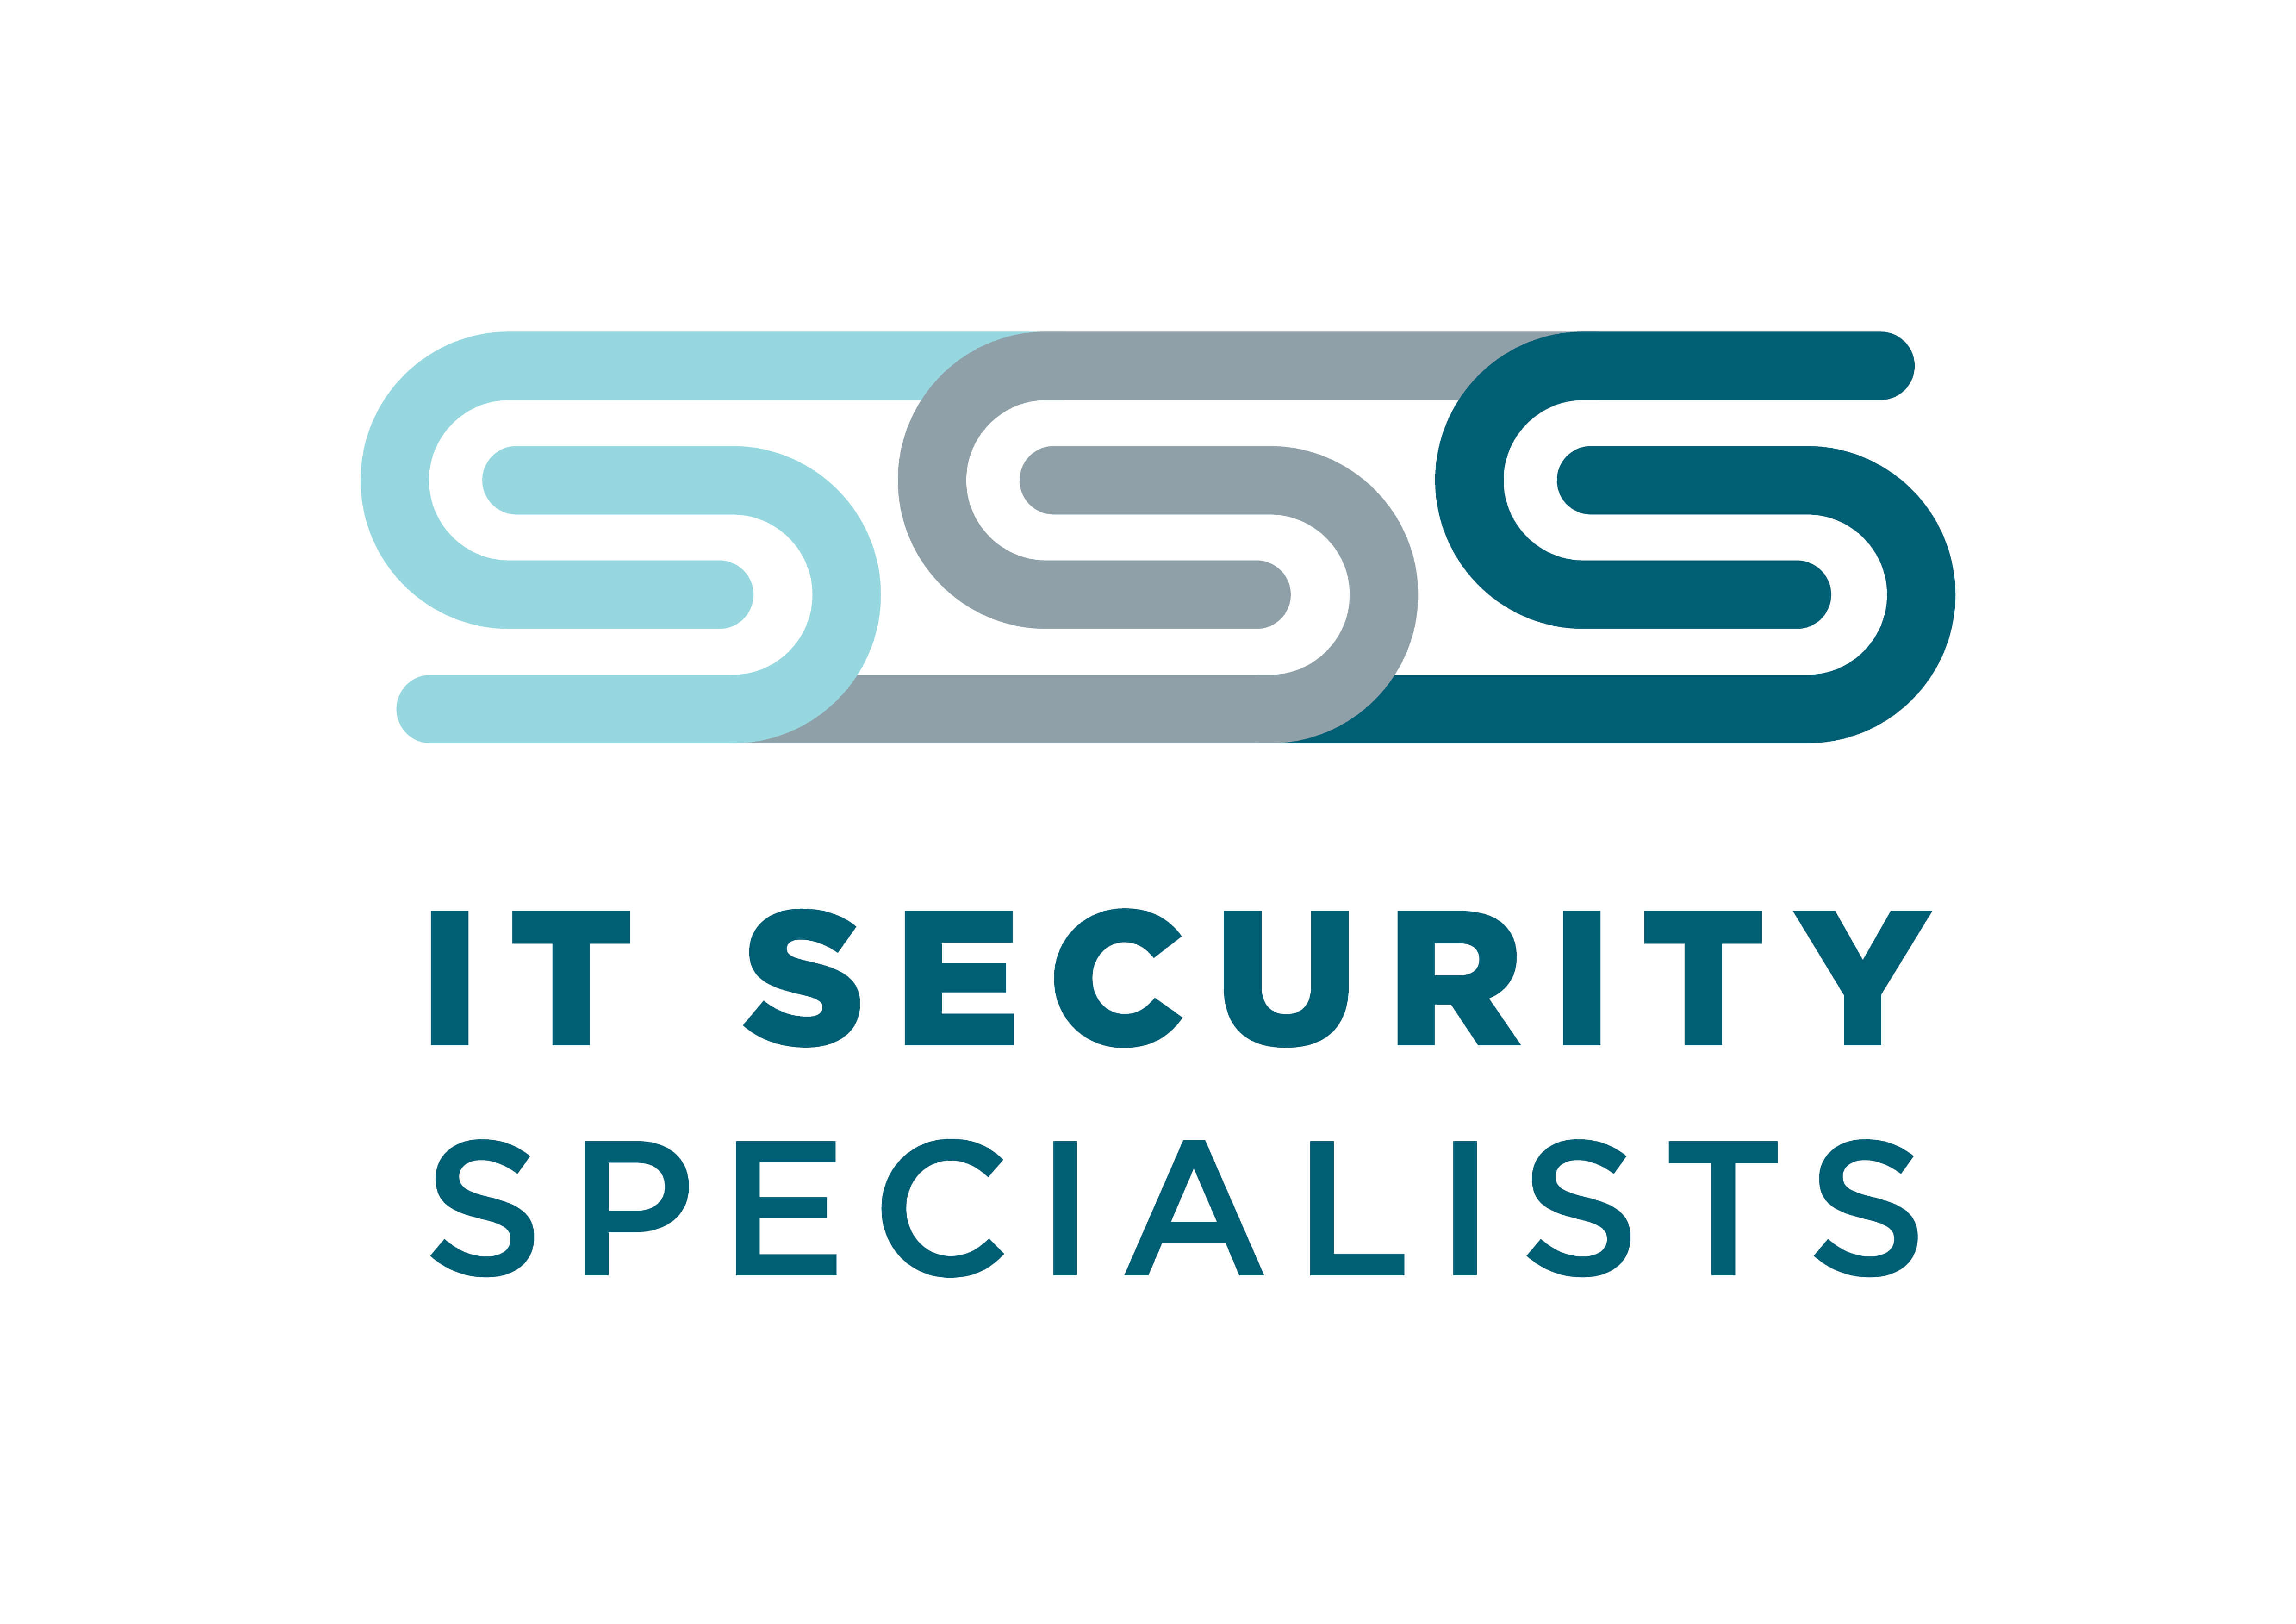 SSS IT Security Specialists logo